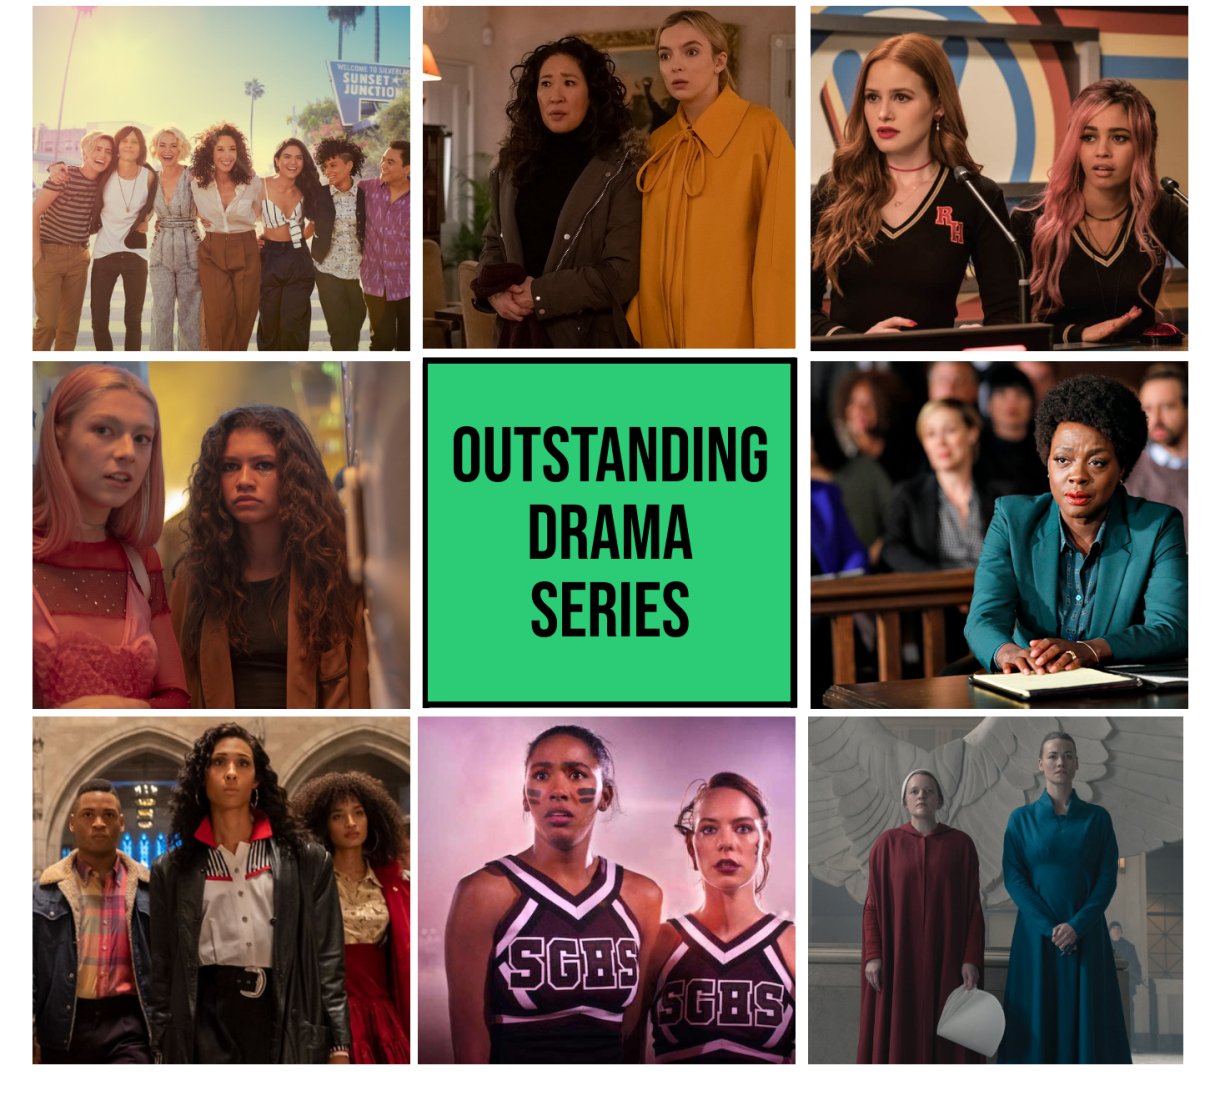 Top Row: The L Word: Generation  Q (Showtime), Killing Eve (BBC), Riverdale (The CW)
Middle Row: Euphoria (HBO), the words "Outstanding Drama Series," How to Get Away With Murder (ABC)
Last Row: Pose (FX), Dare Me (USA), The Handmaid's Tale (Hulu)